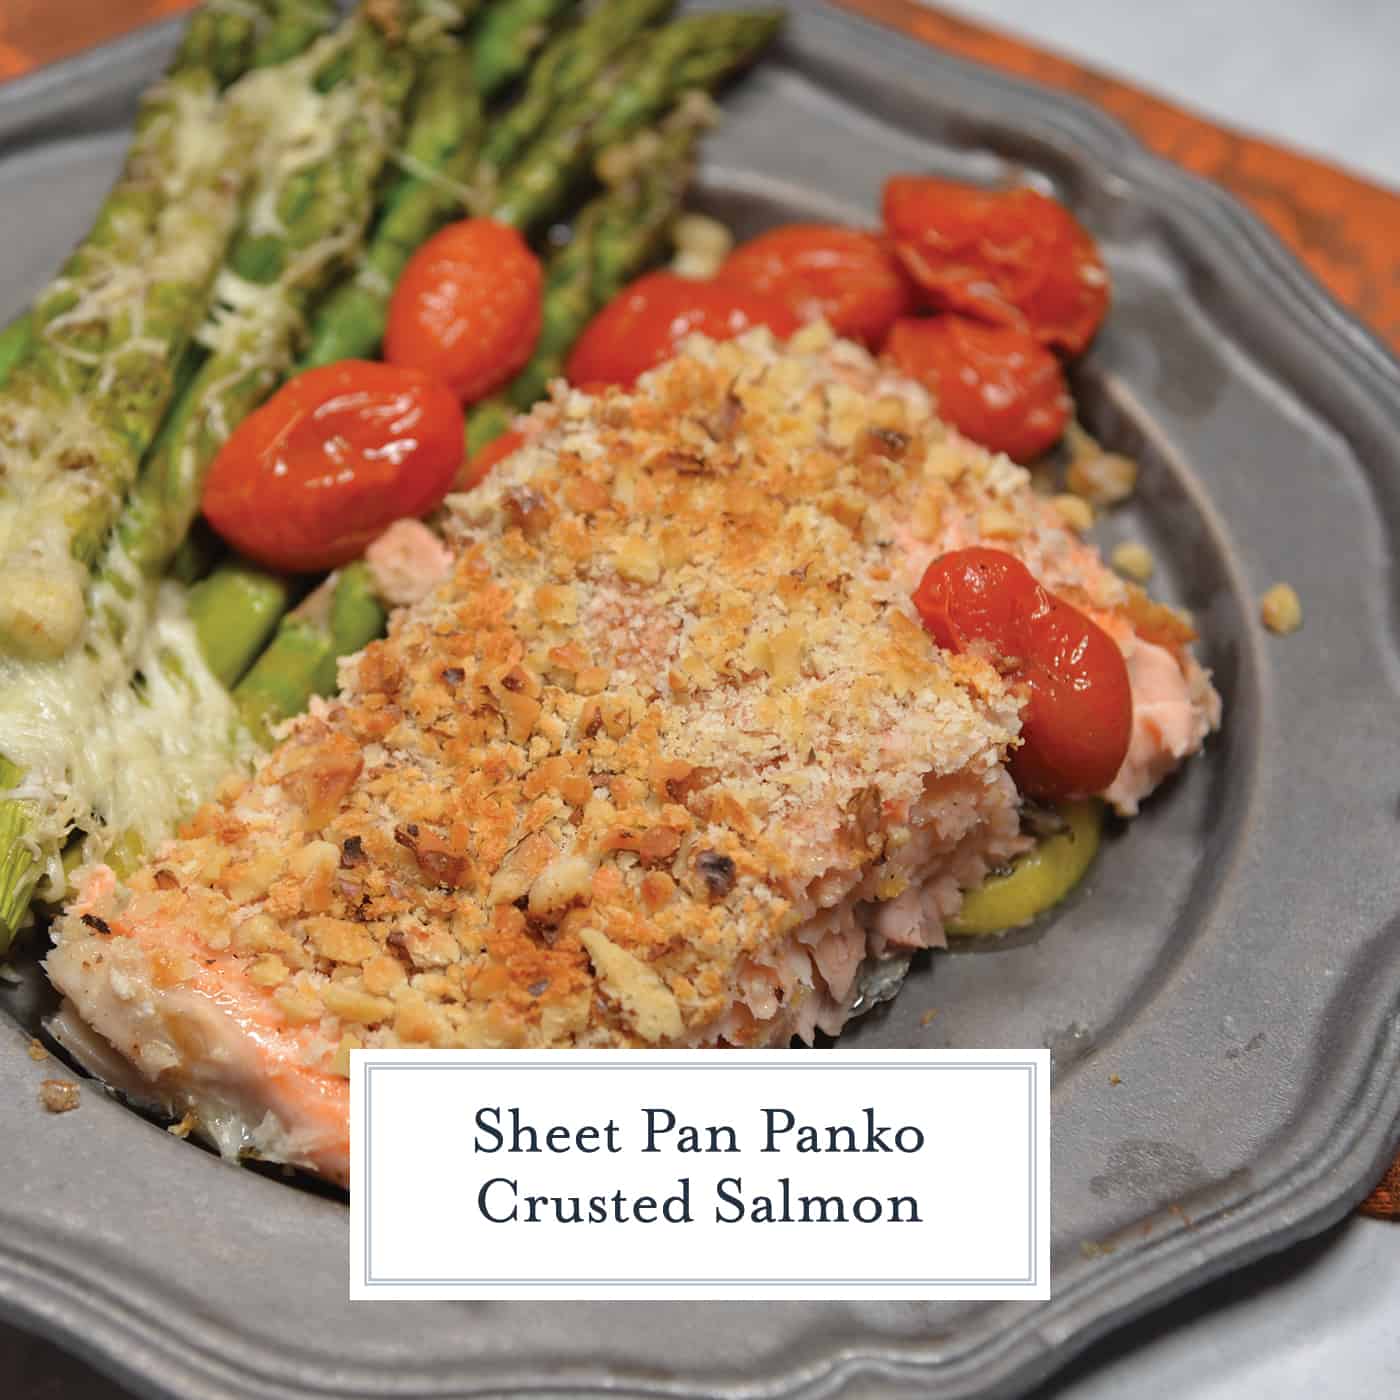 Panko Crusted Salmon is a fast, easy, and healthy weeknight meal! This recipe uses tomatoes, asparagus, and a crispy panko and walnut topping for your salmon! #crustedsalmon #sheetpandinners #salmonintheoven www.savoryexperiments.com